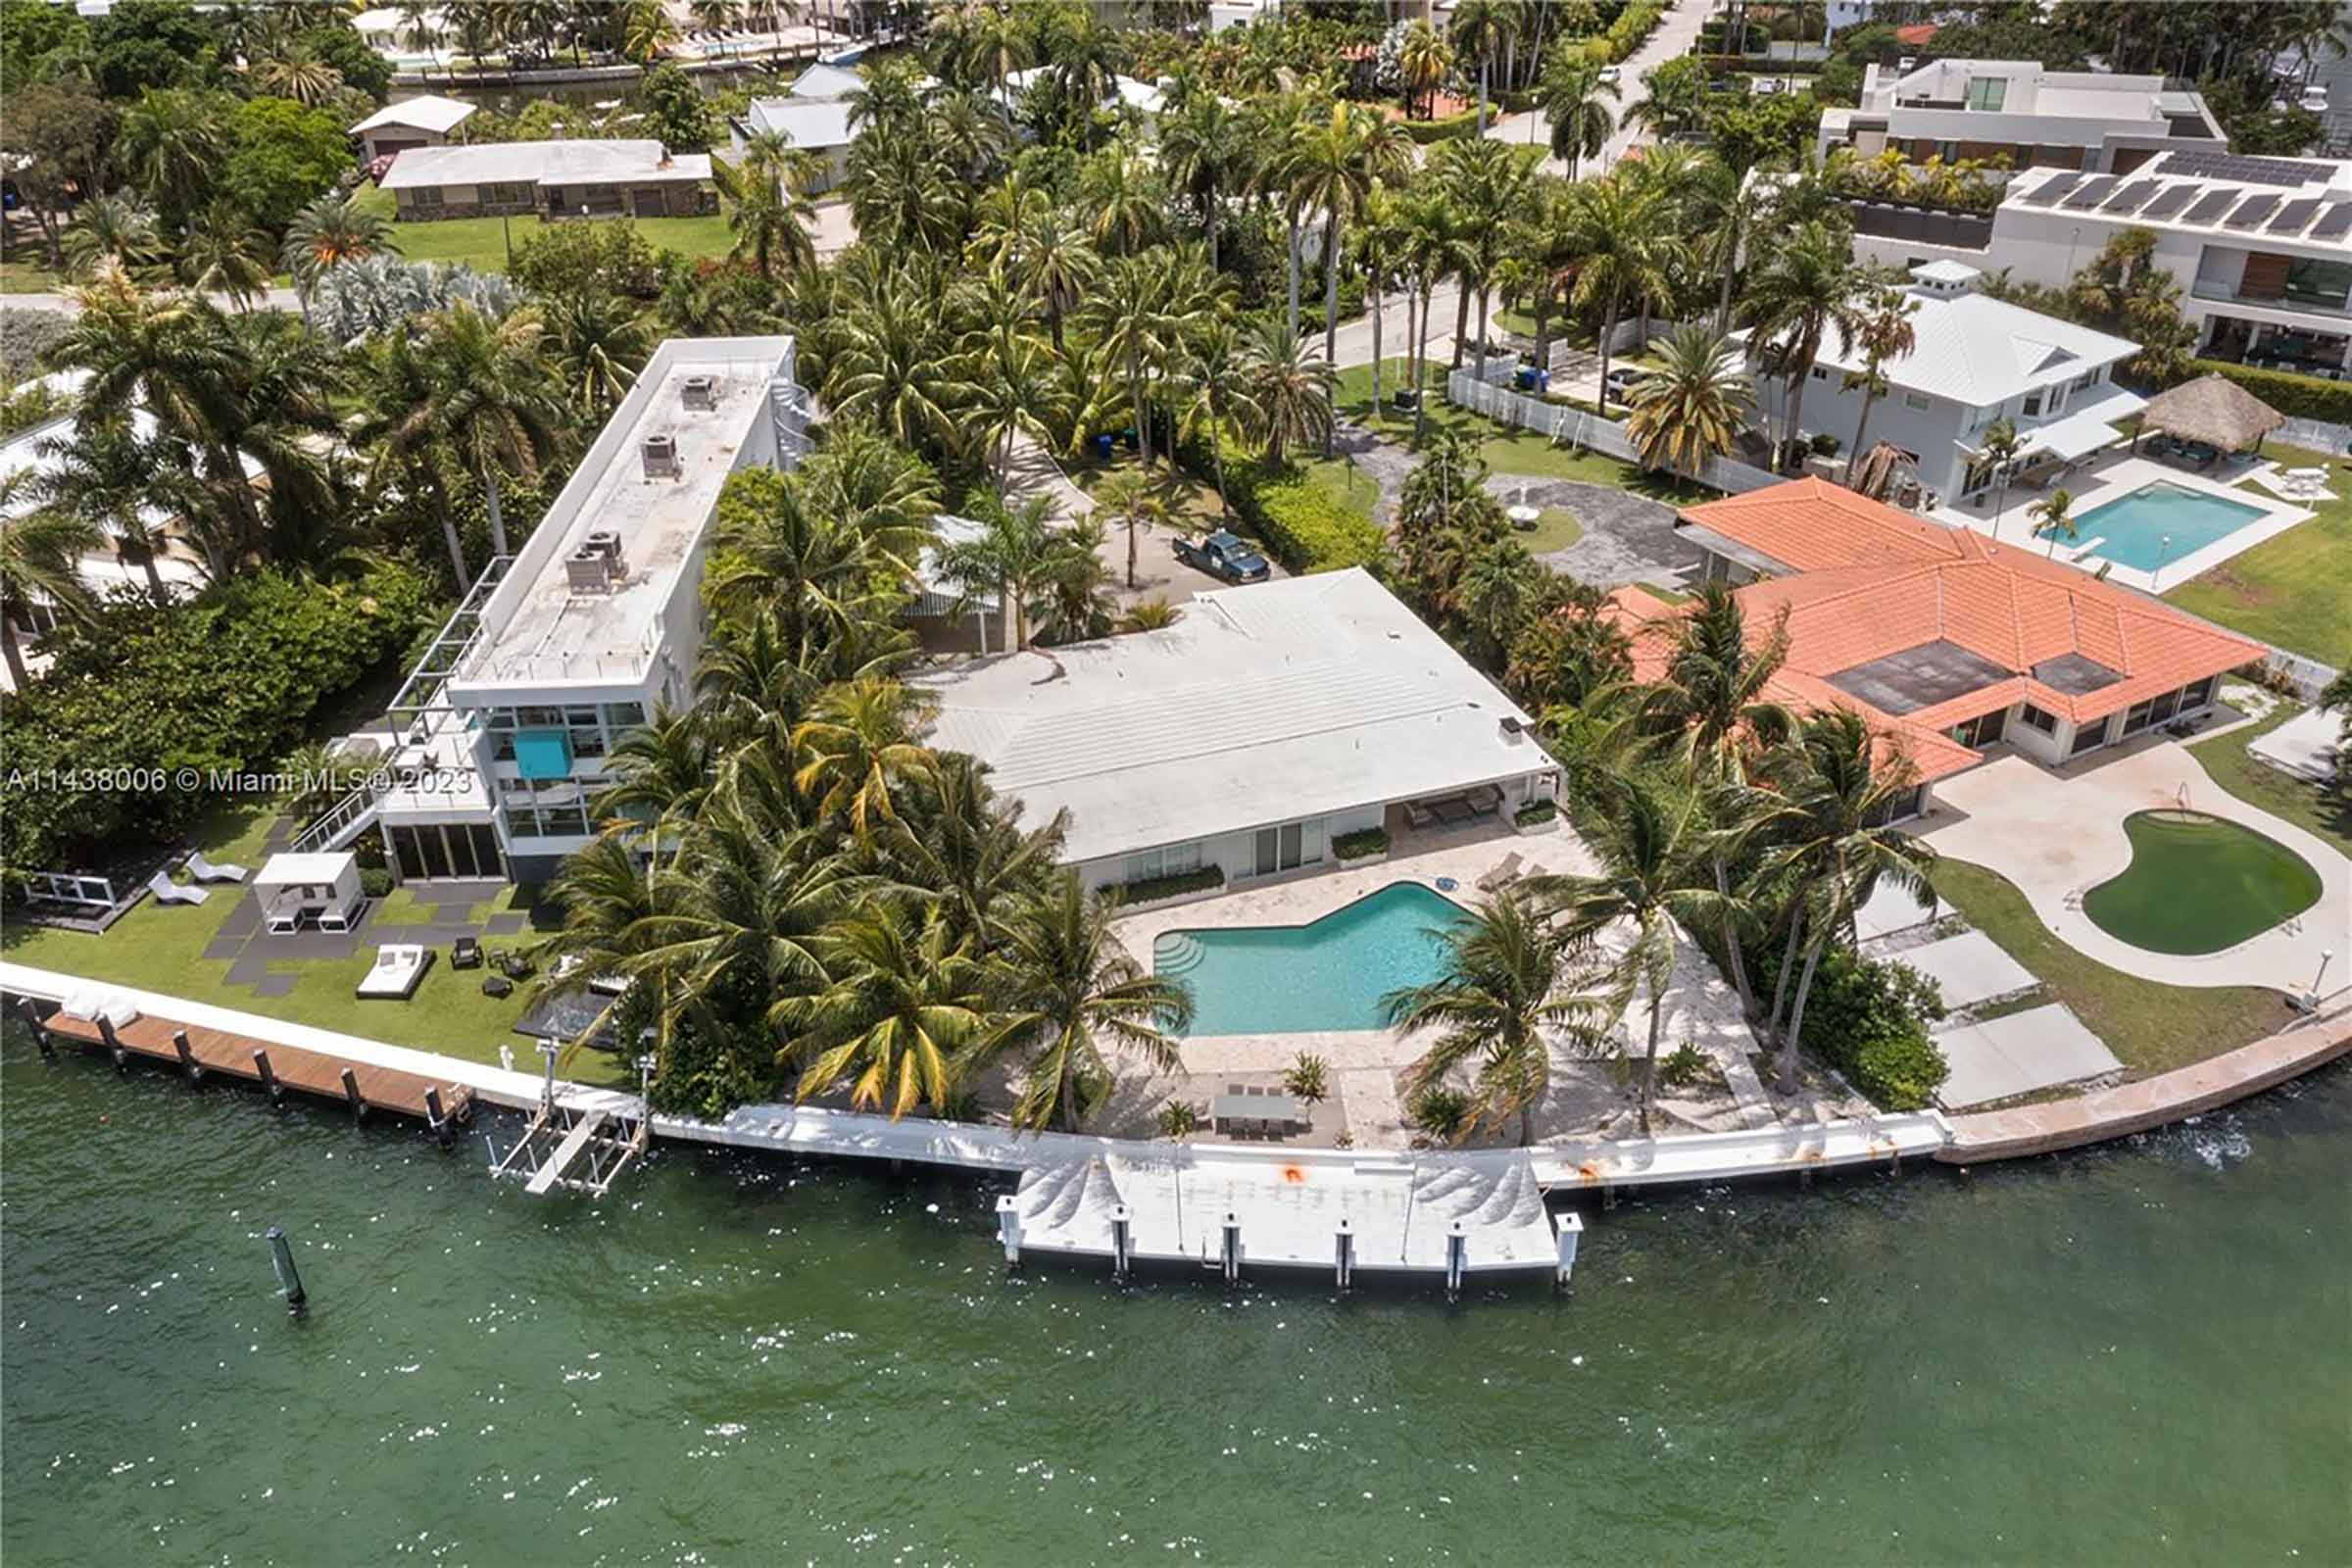 Dr. Lenny Hochstein Belle Meade Island Miami Home Aerial